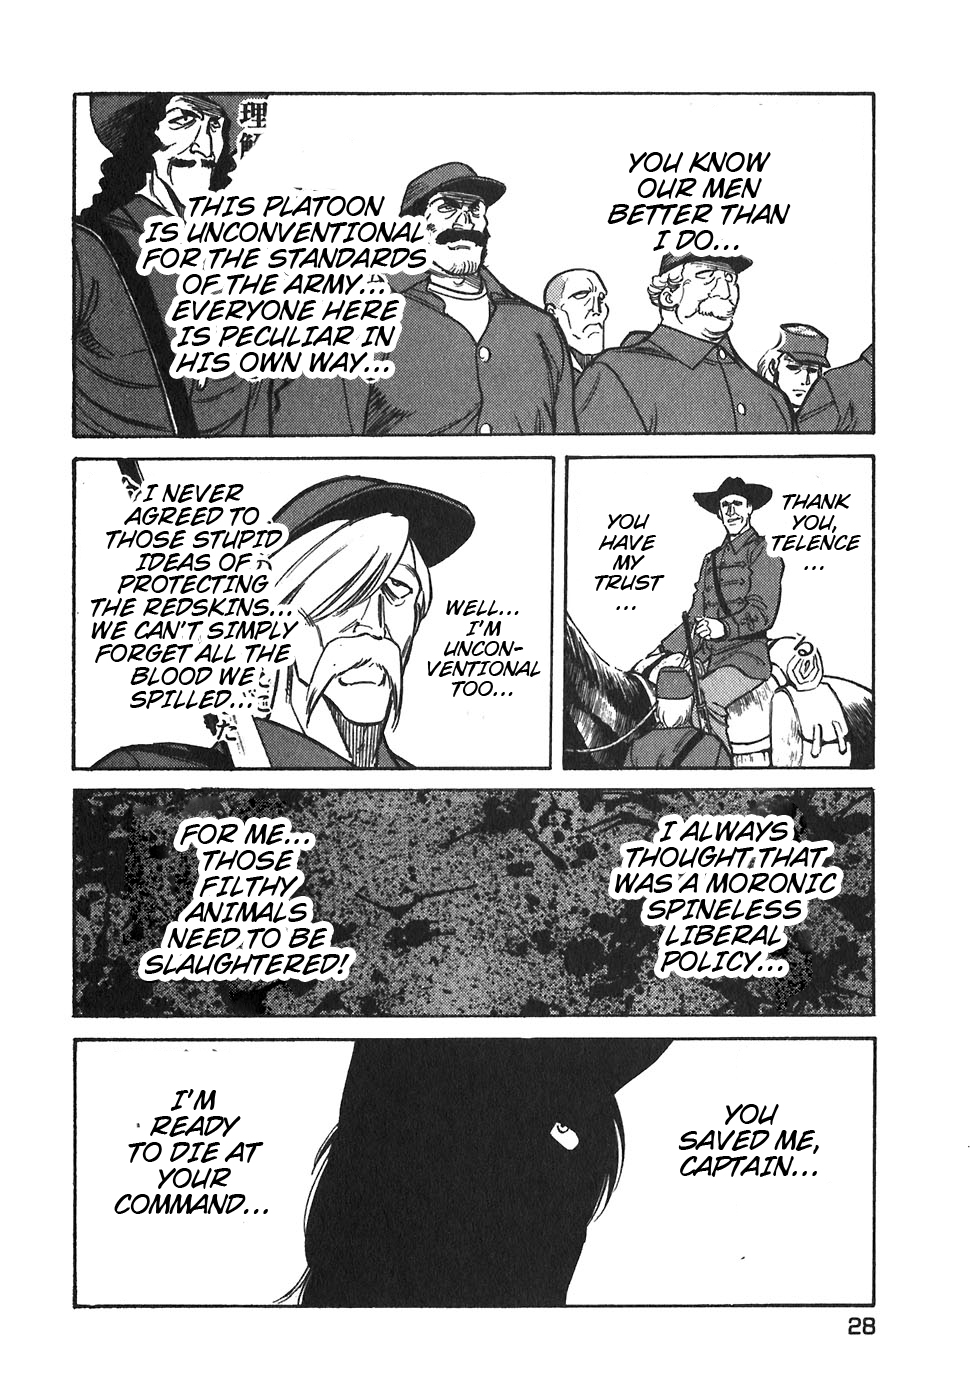 RED: Living on the Edge Vol. 10 Ch. 73 Death Wish 2